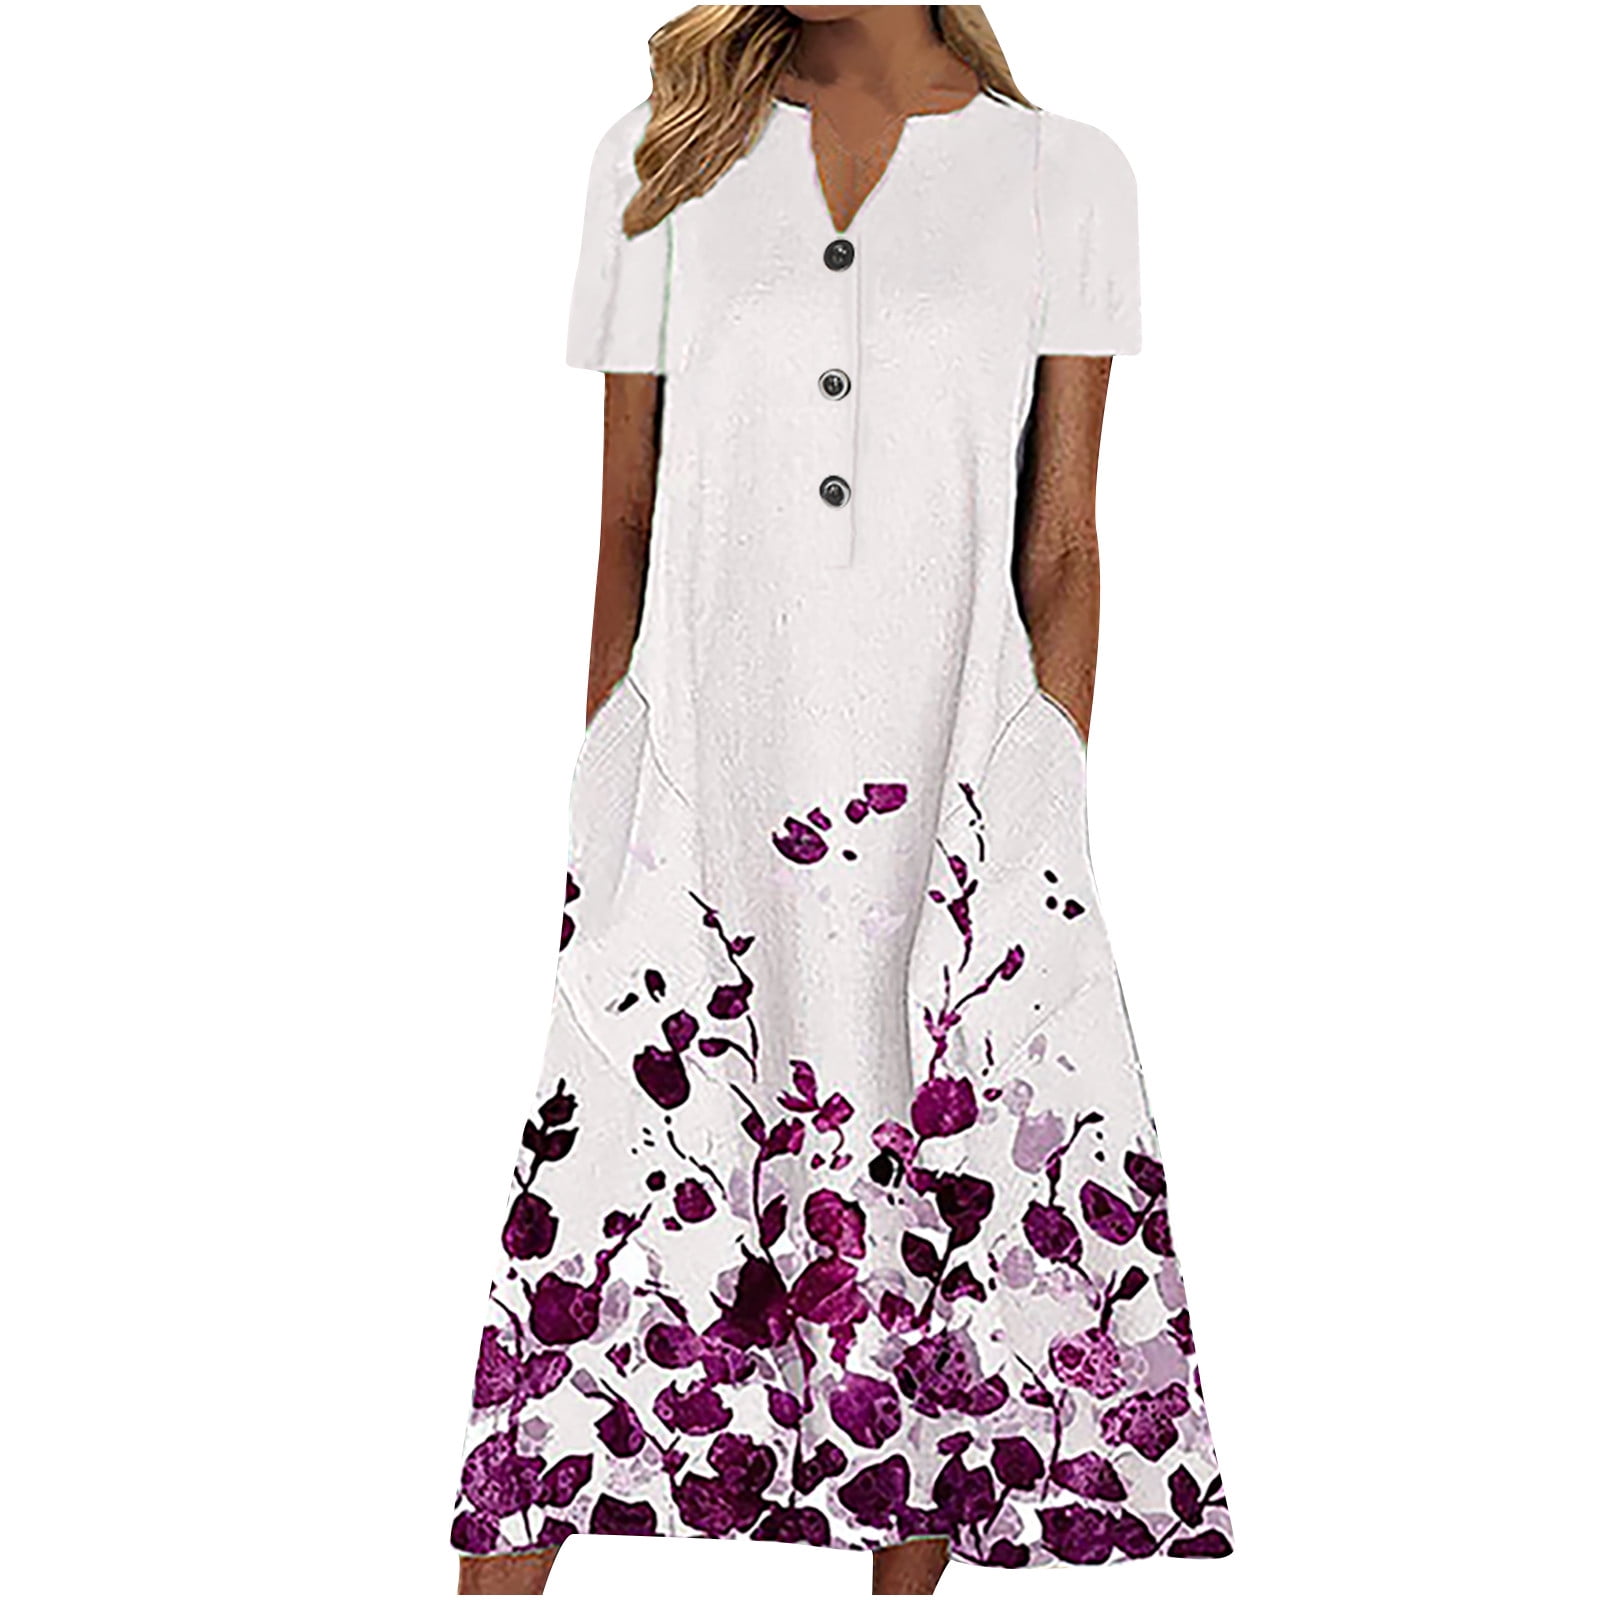 Women Floral Button Pockets Swing Maxi Dress Casual Long Sleeve Baggy ...